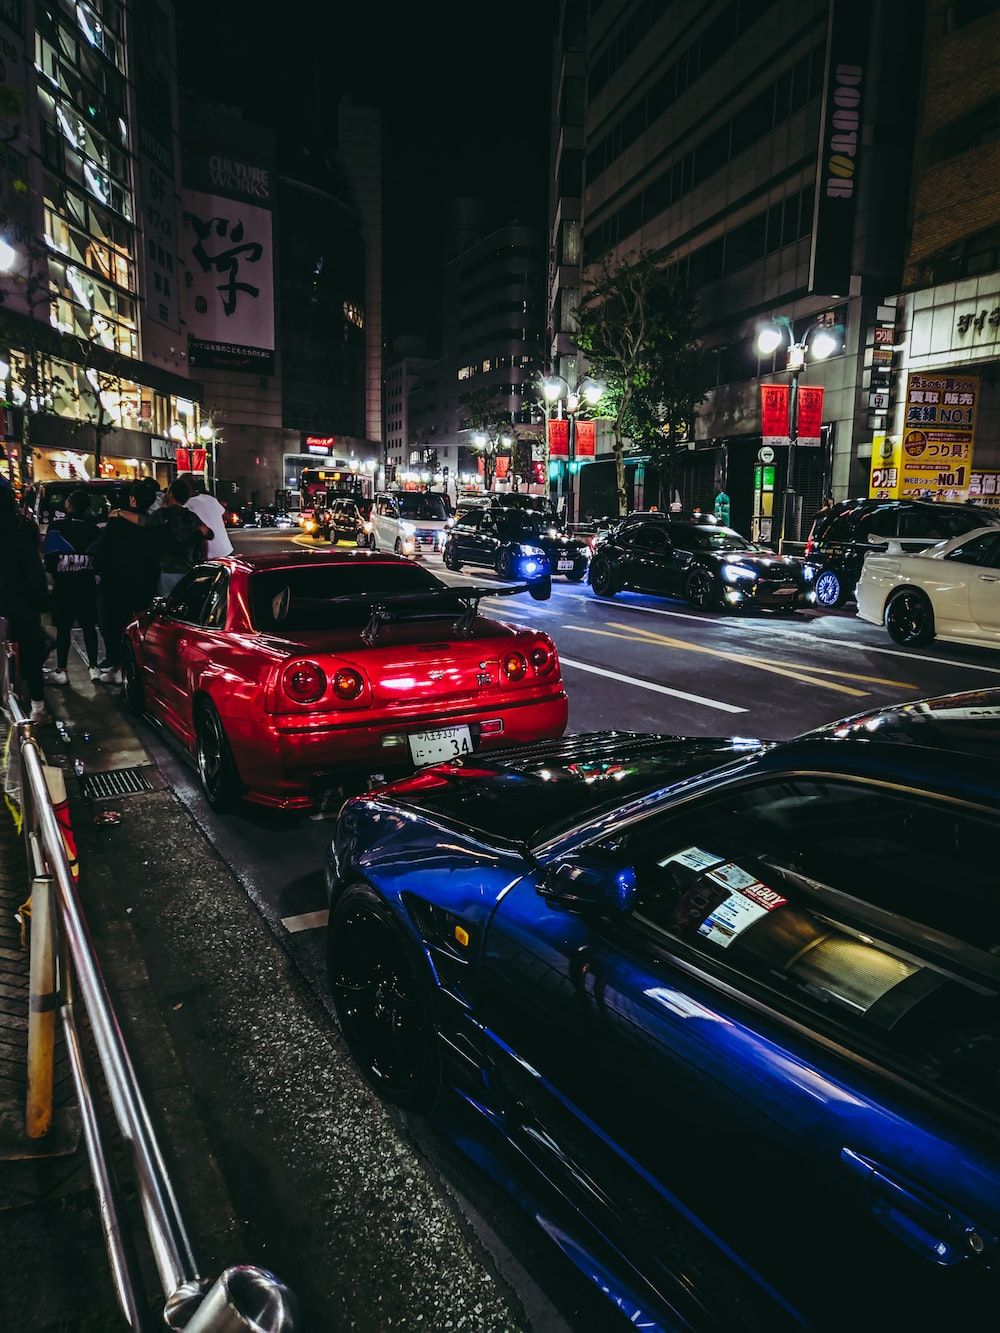 A group of cars parked on the sidewalk - JDM